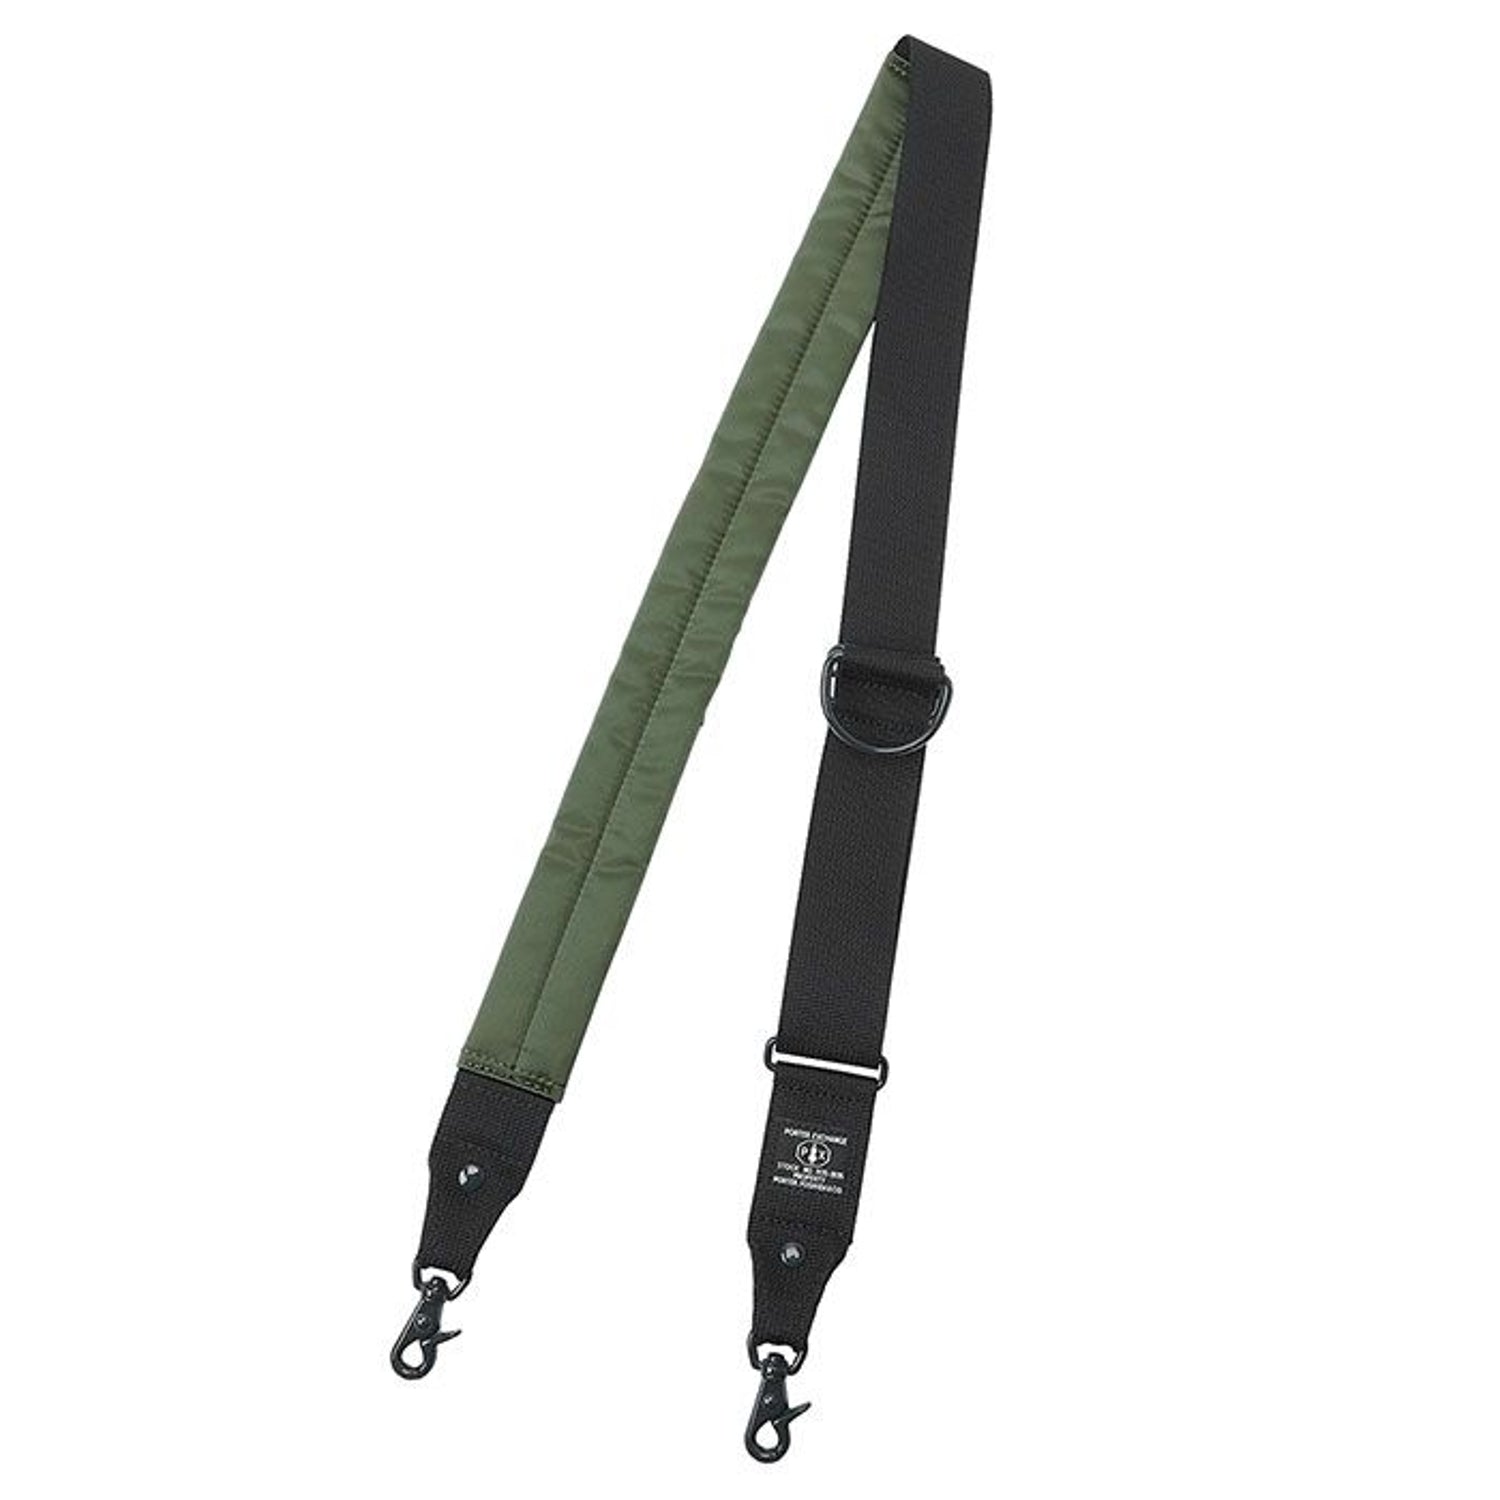 PORTER - PX Tanker Carrying Equipment Strap 40 - (Sage Green) view 1